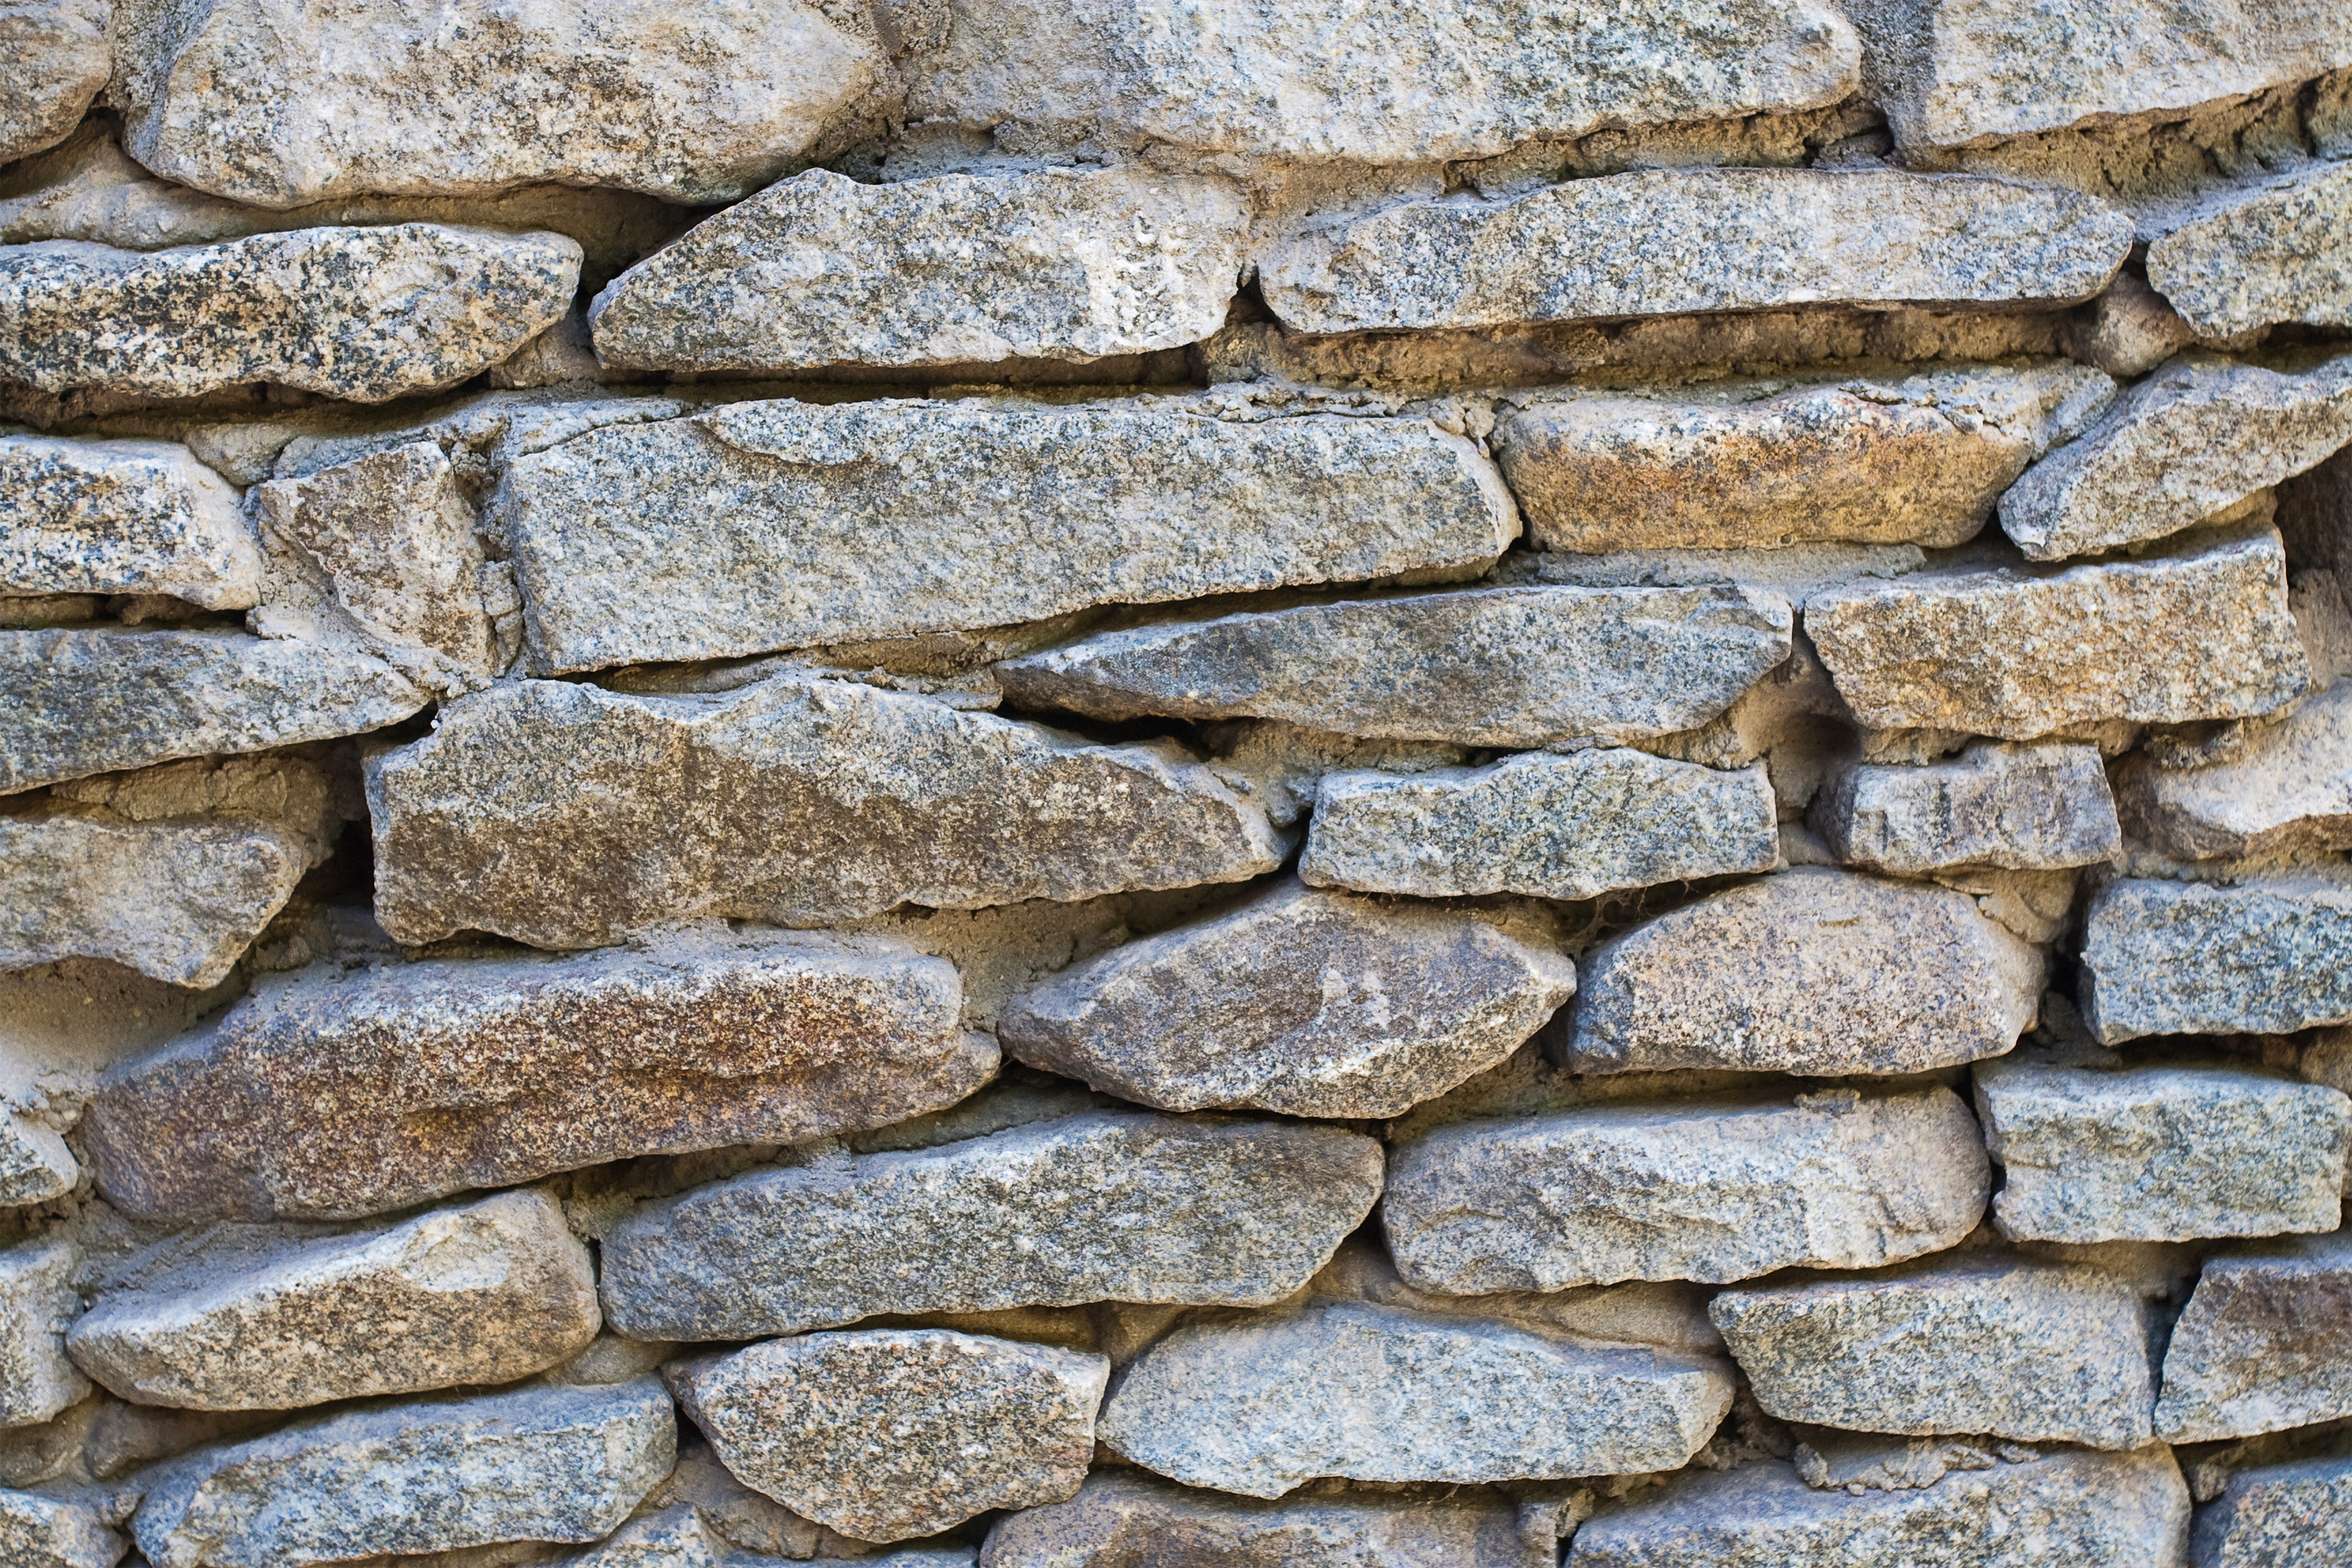 Stone Wall Texture Background.